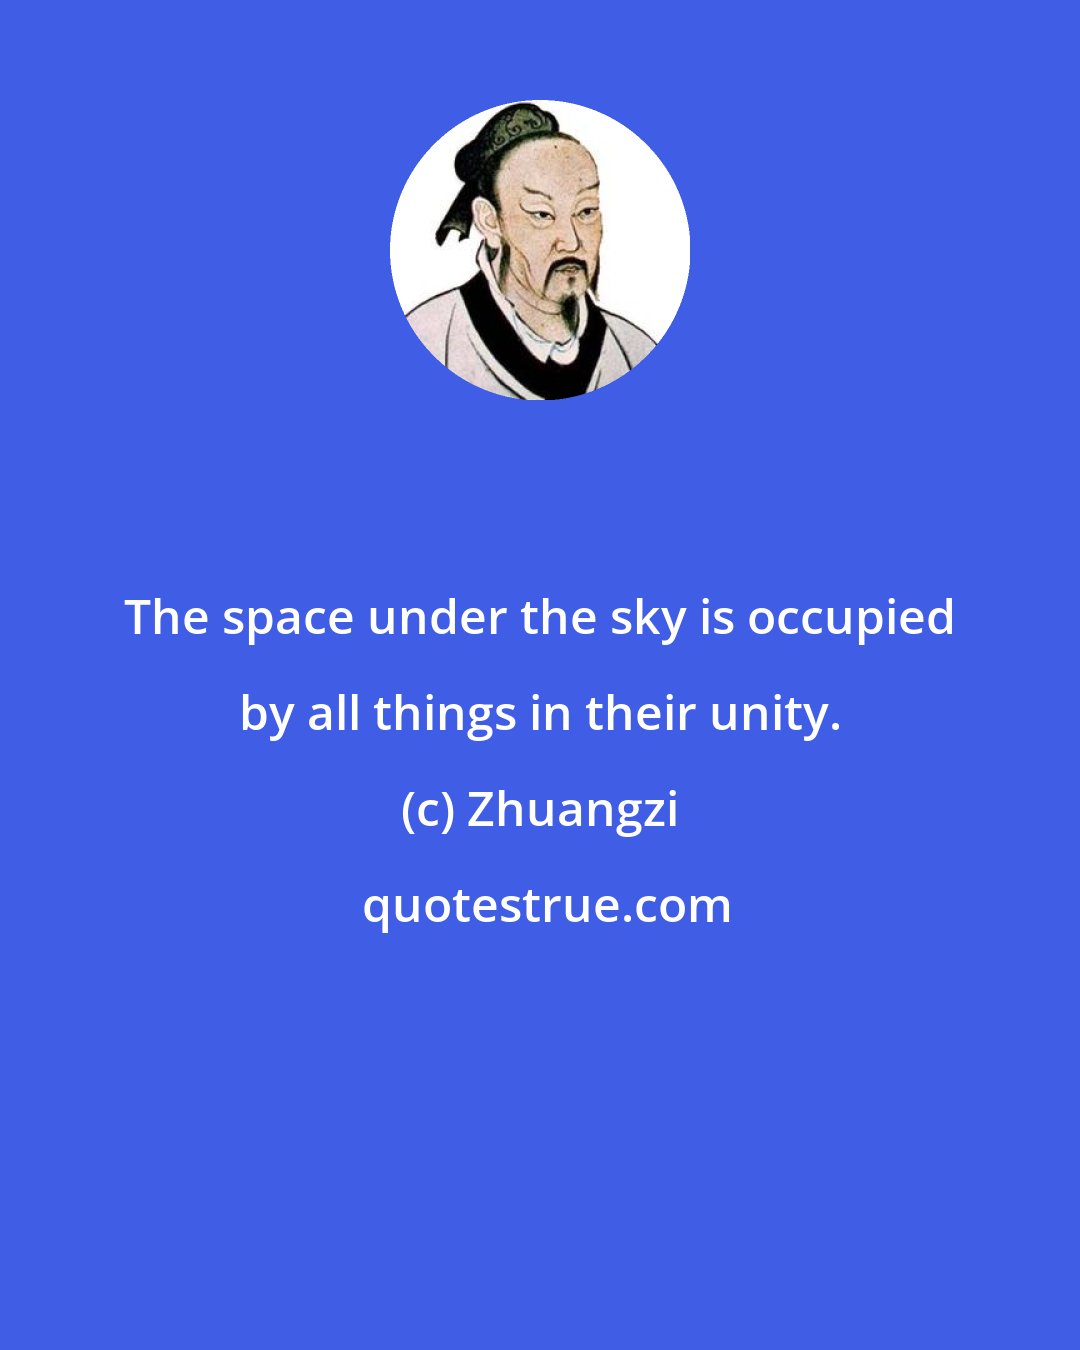 Zhuangzi: The space under the sky is occupied by all things in their unity.